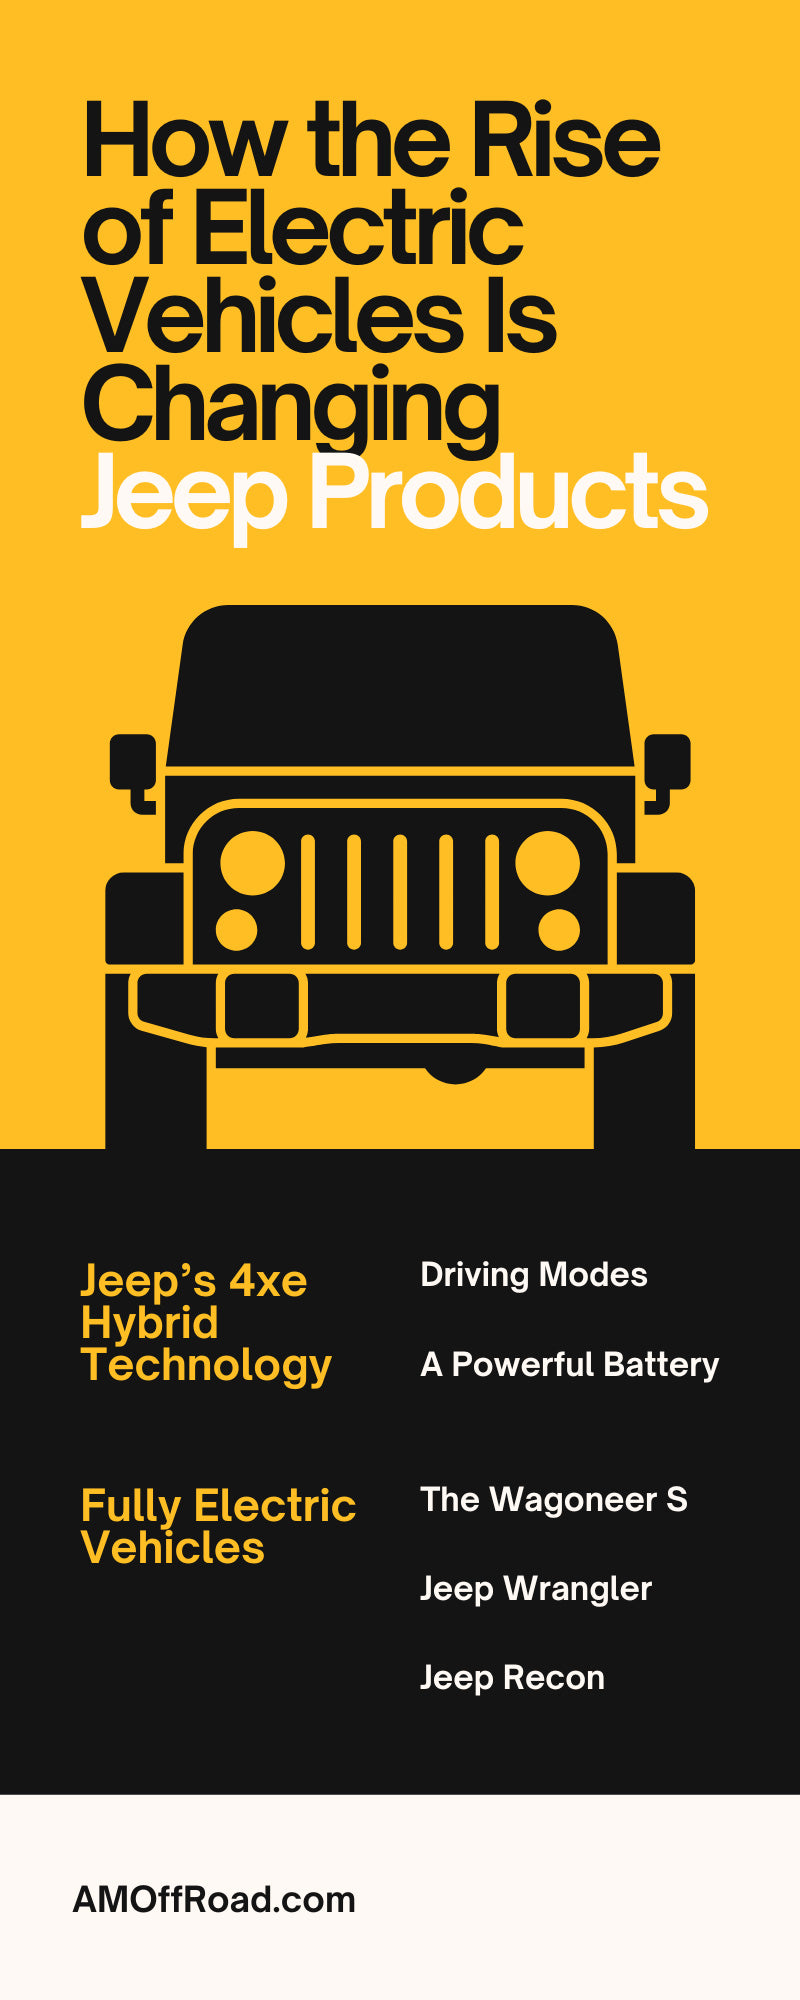 How the Rise of Electric Vehicles Is Changing Jeep Products